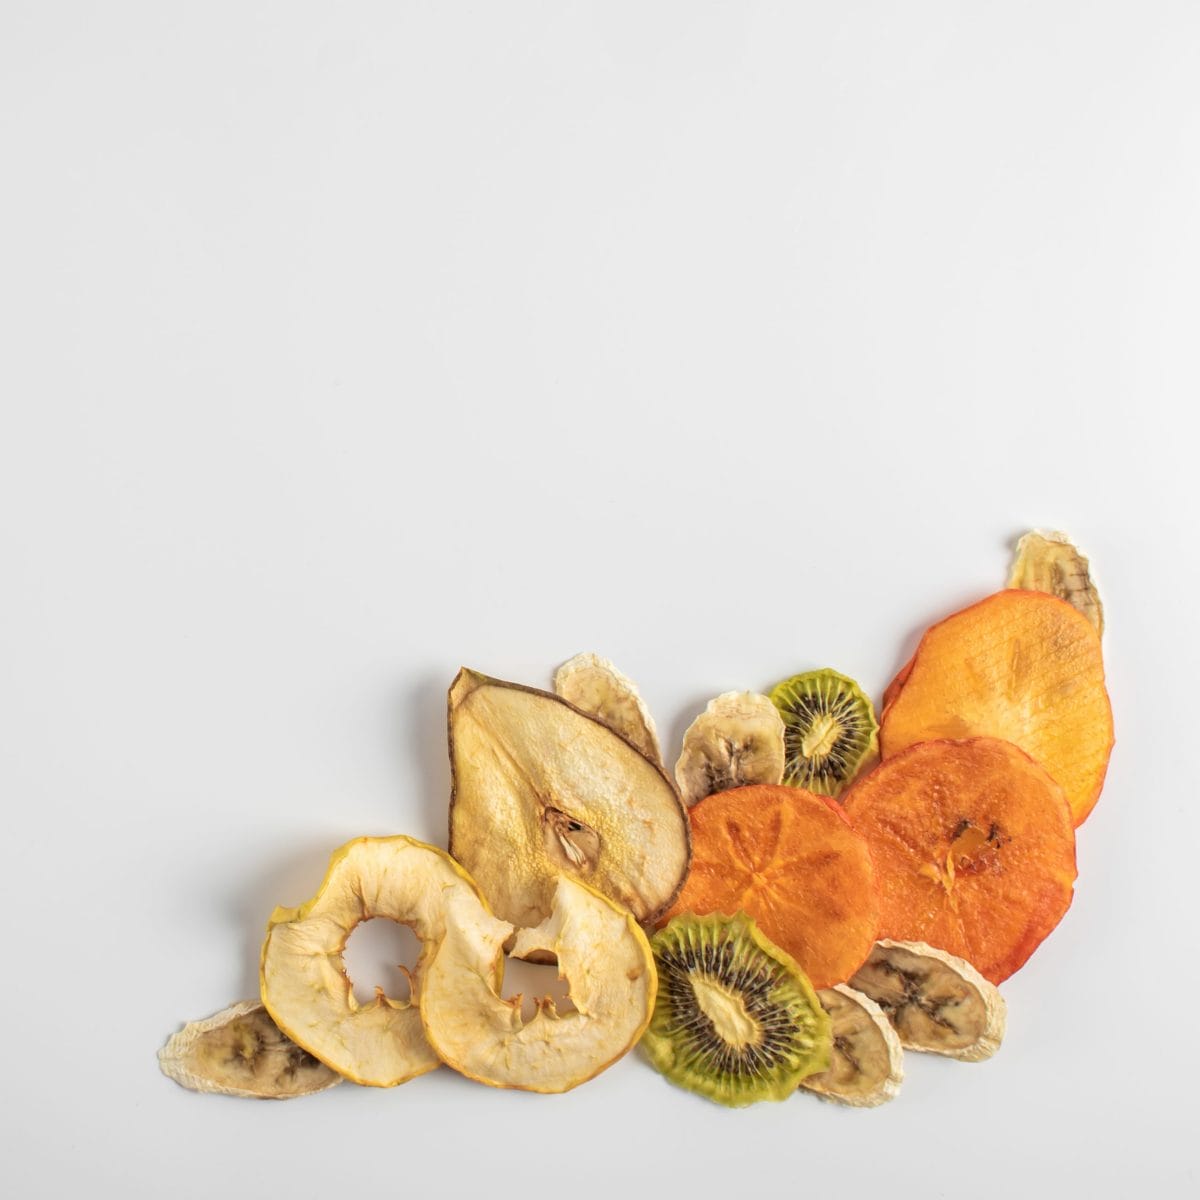 dehydrated-fruits-on-a-light-background-2021-08-30-22-38-18-utc-scaled.jpg?strip=all&lossy=1&fit=1200%2C1200&ssl=1